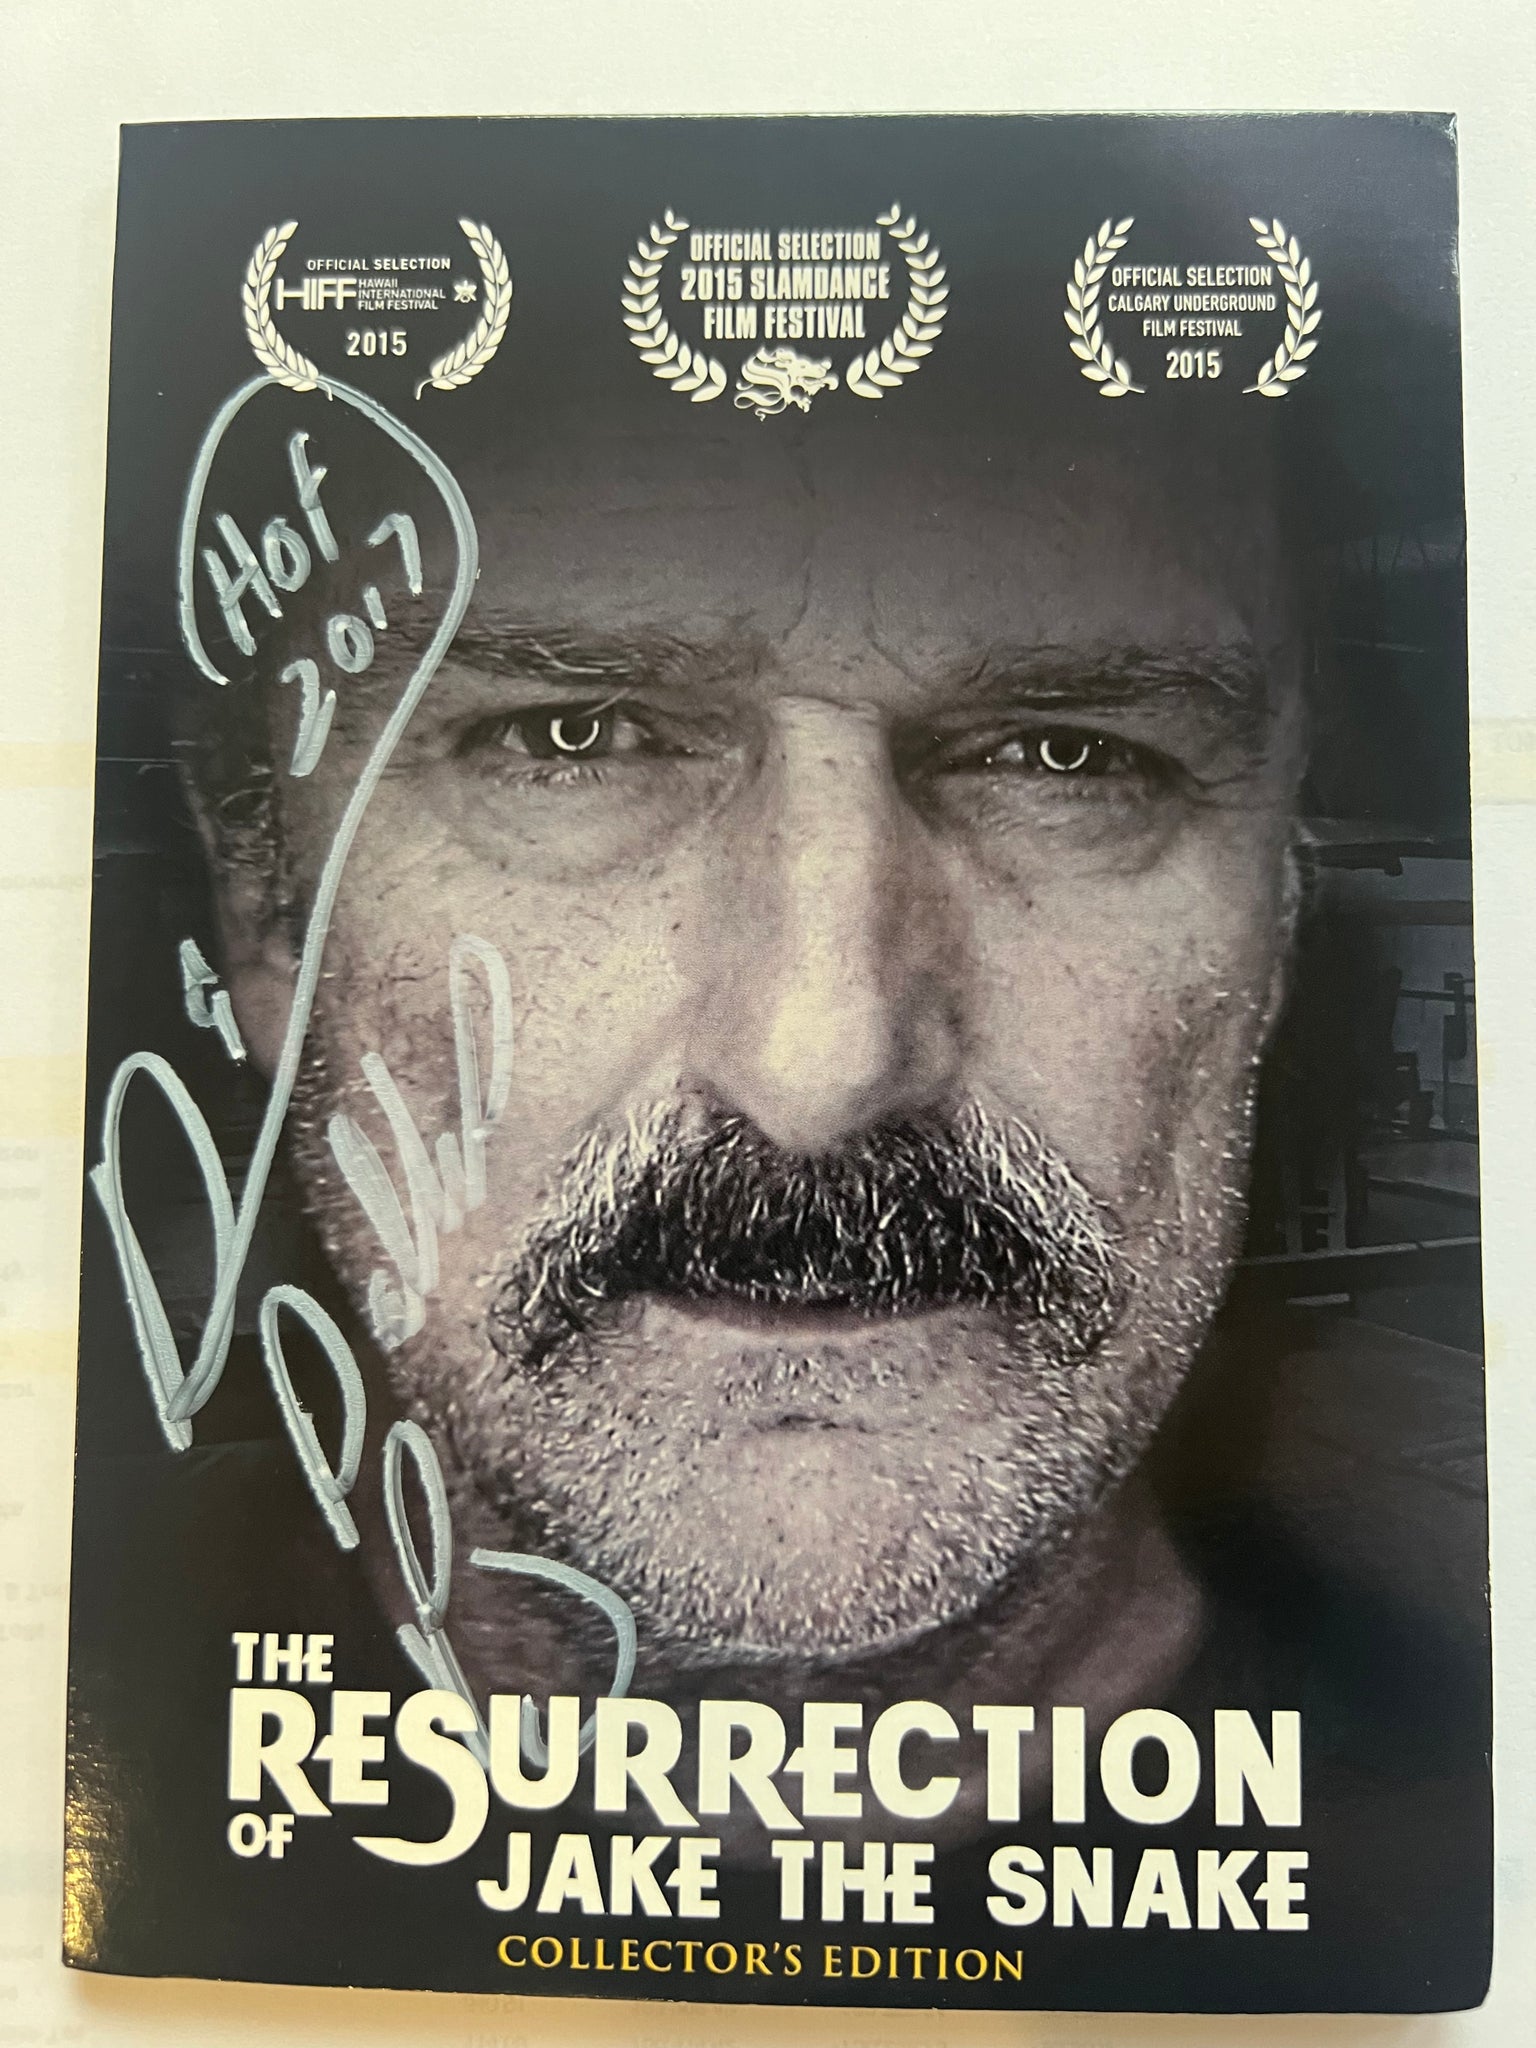 Signed Resurrection of Jake The Snake Standard DVD - Collectors Edition